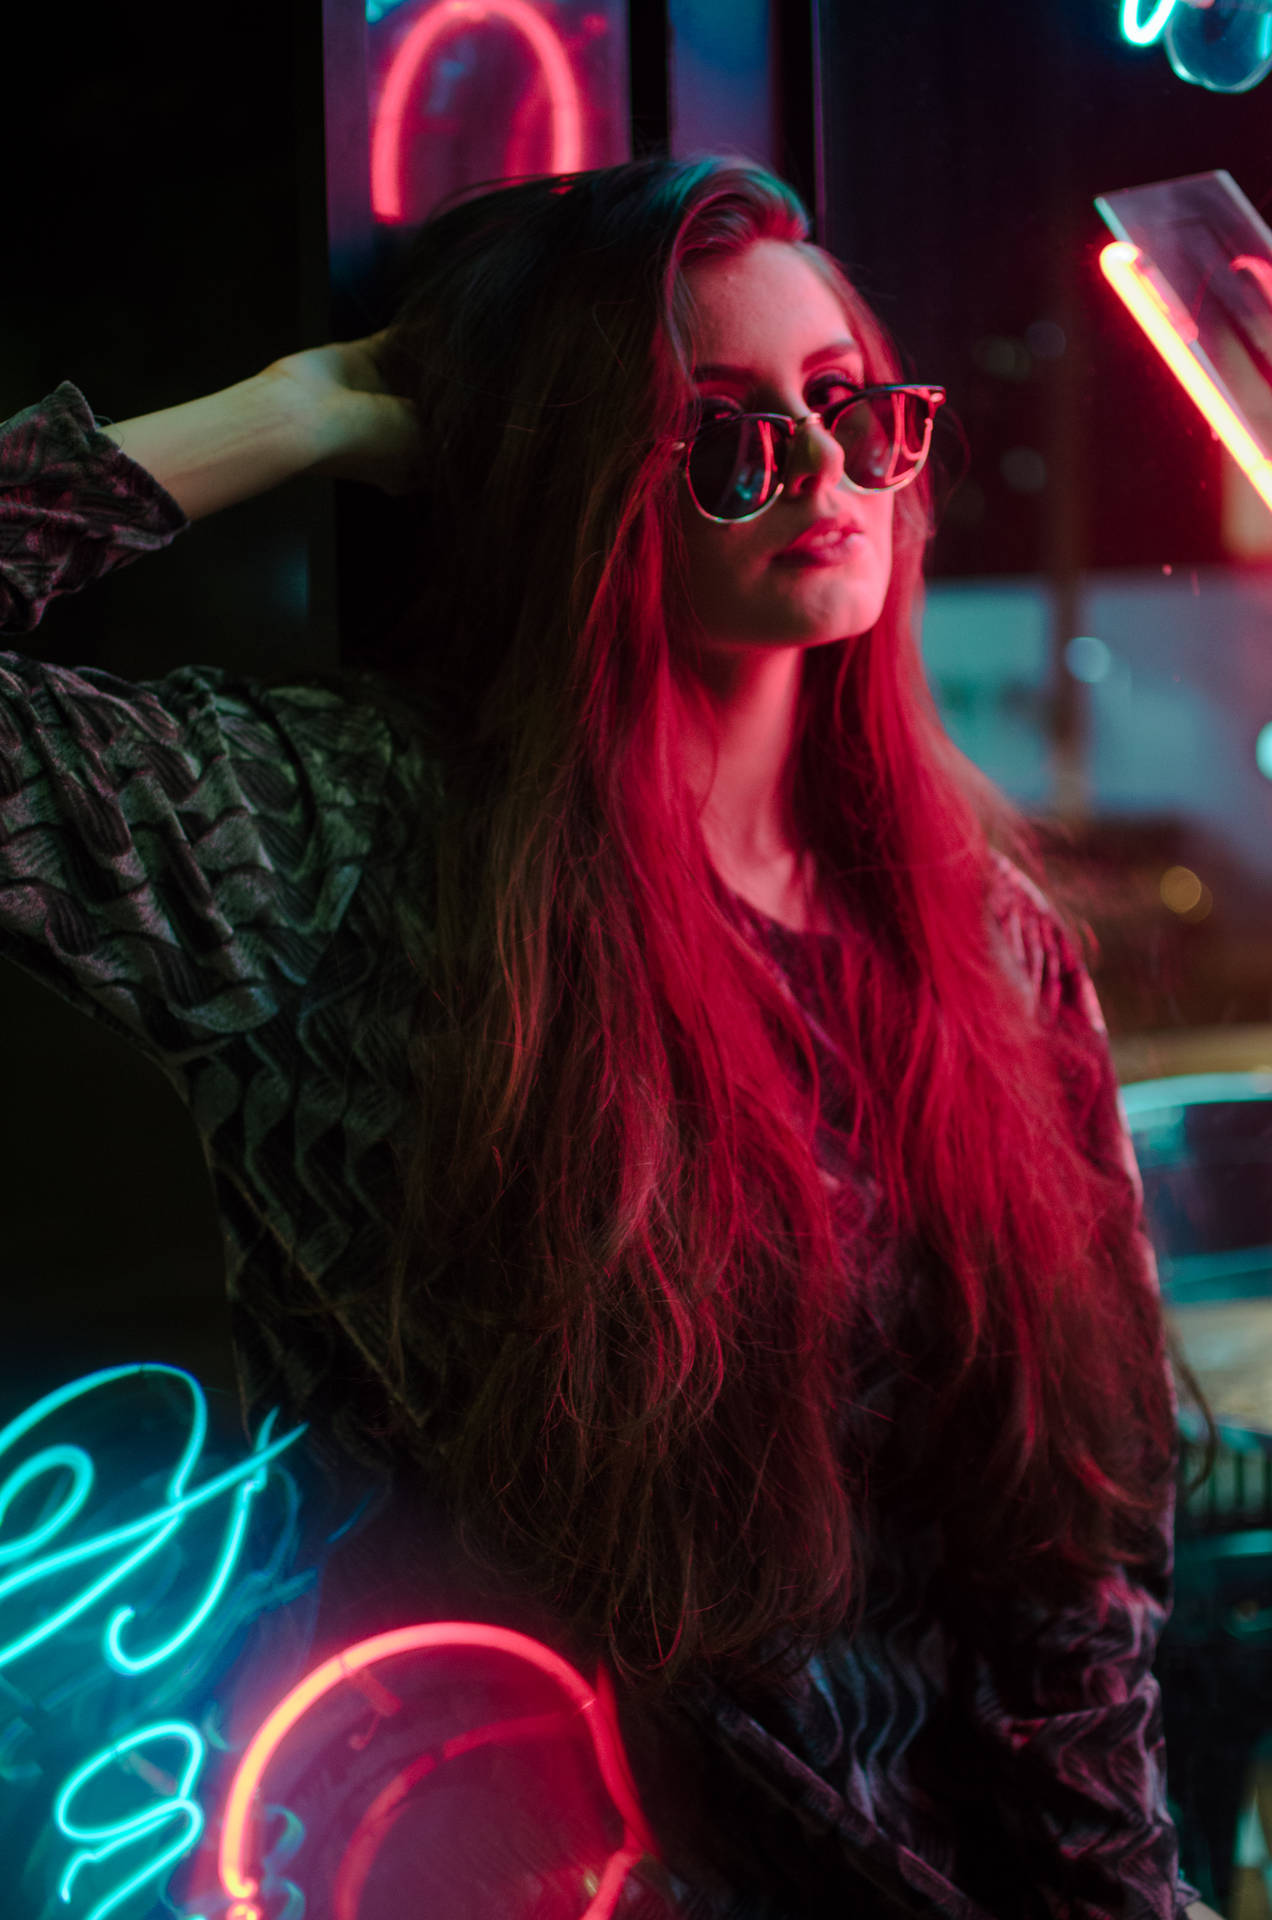 Cool Girl In Neon Room